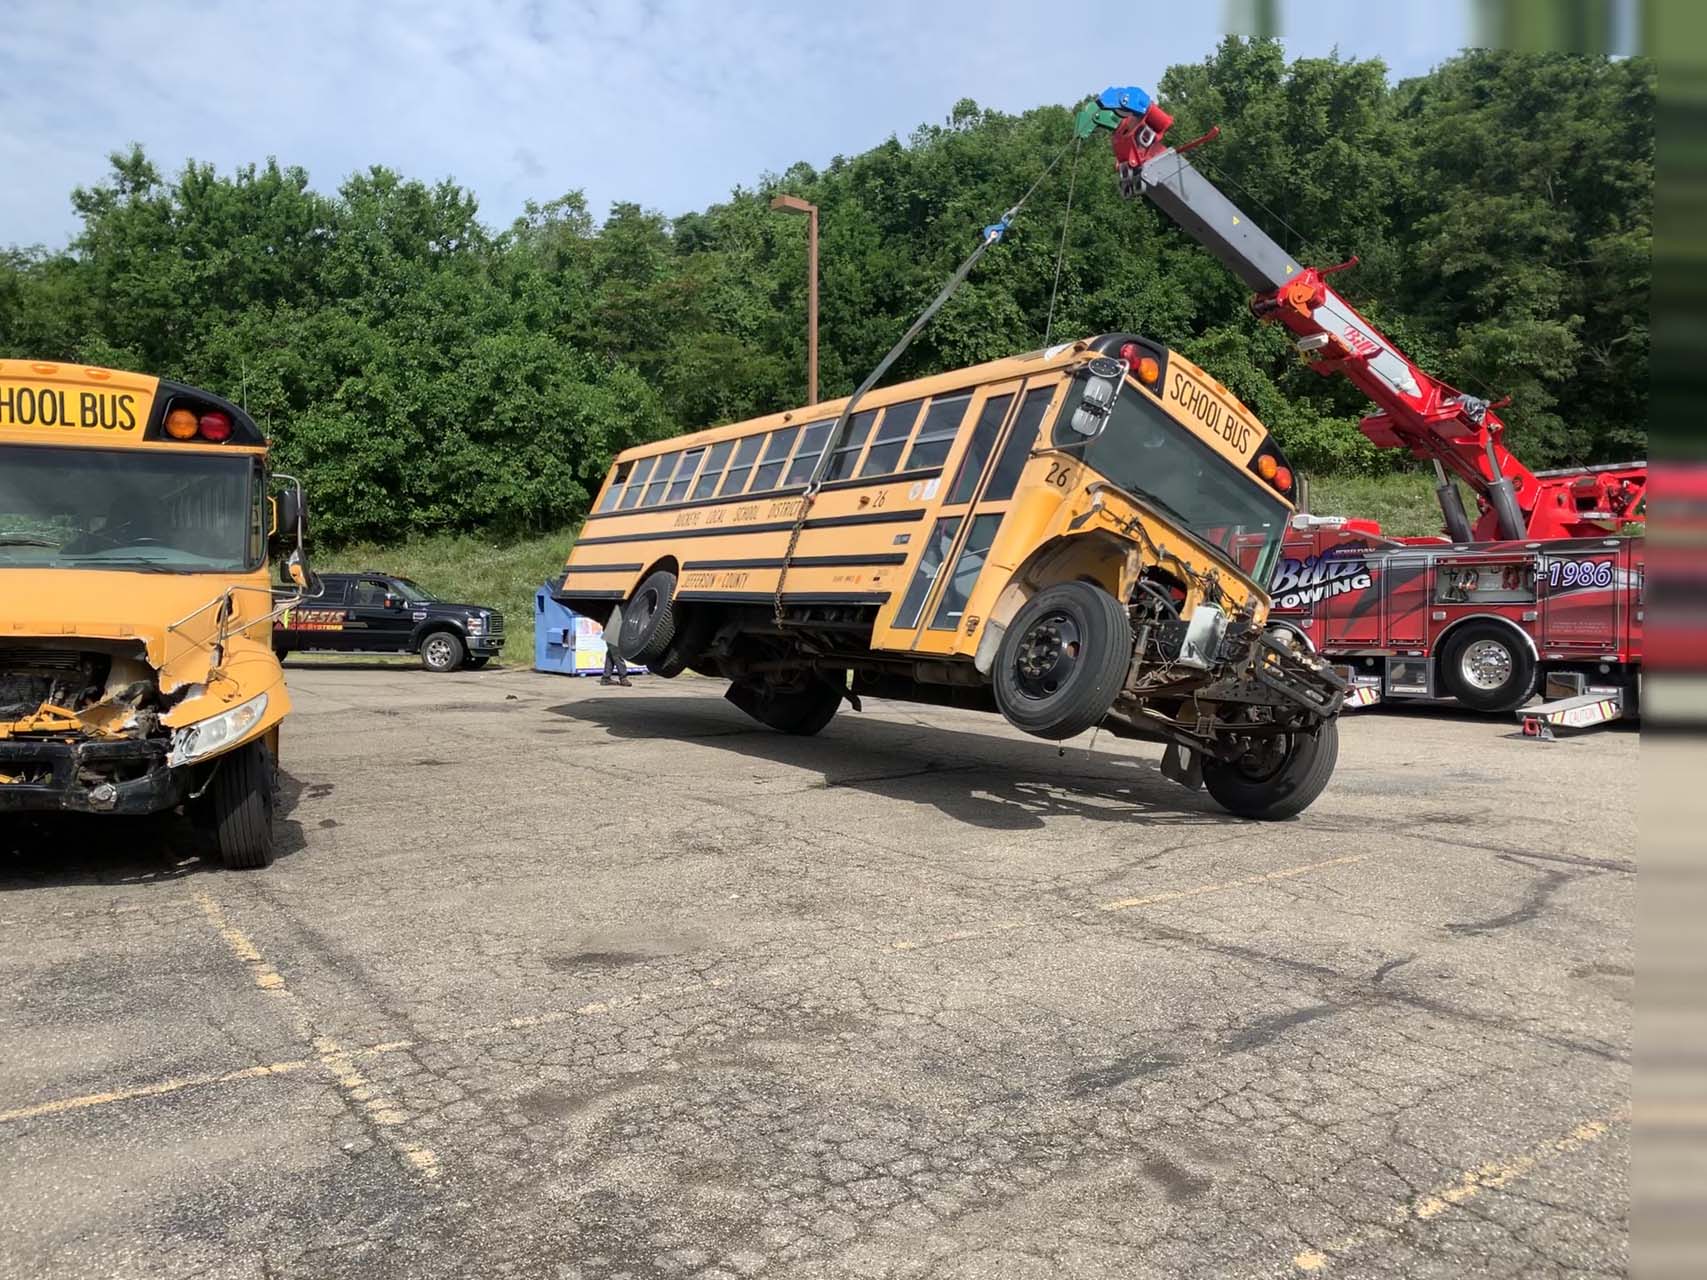  Ohio School Bus Crash Prompts Mock Casualty Training with First Responders 